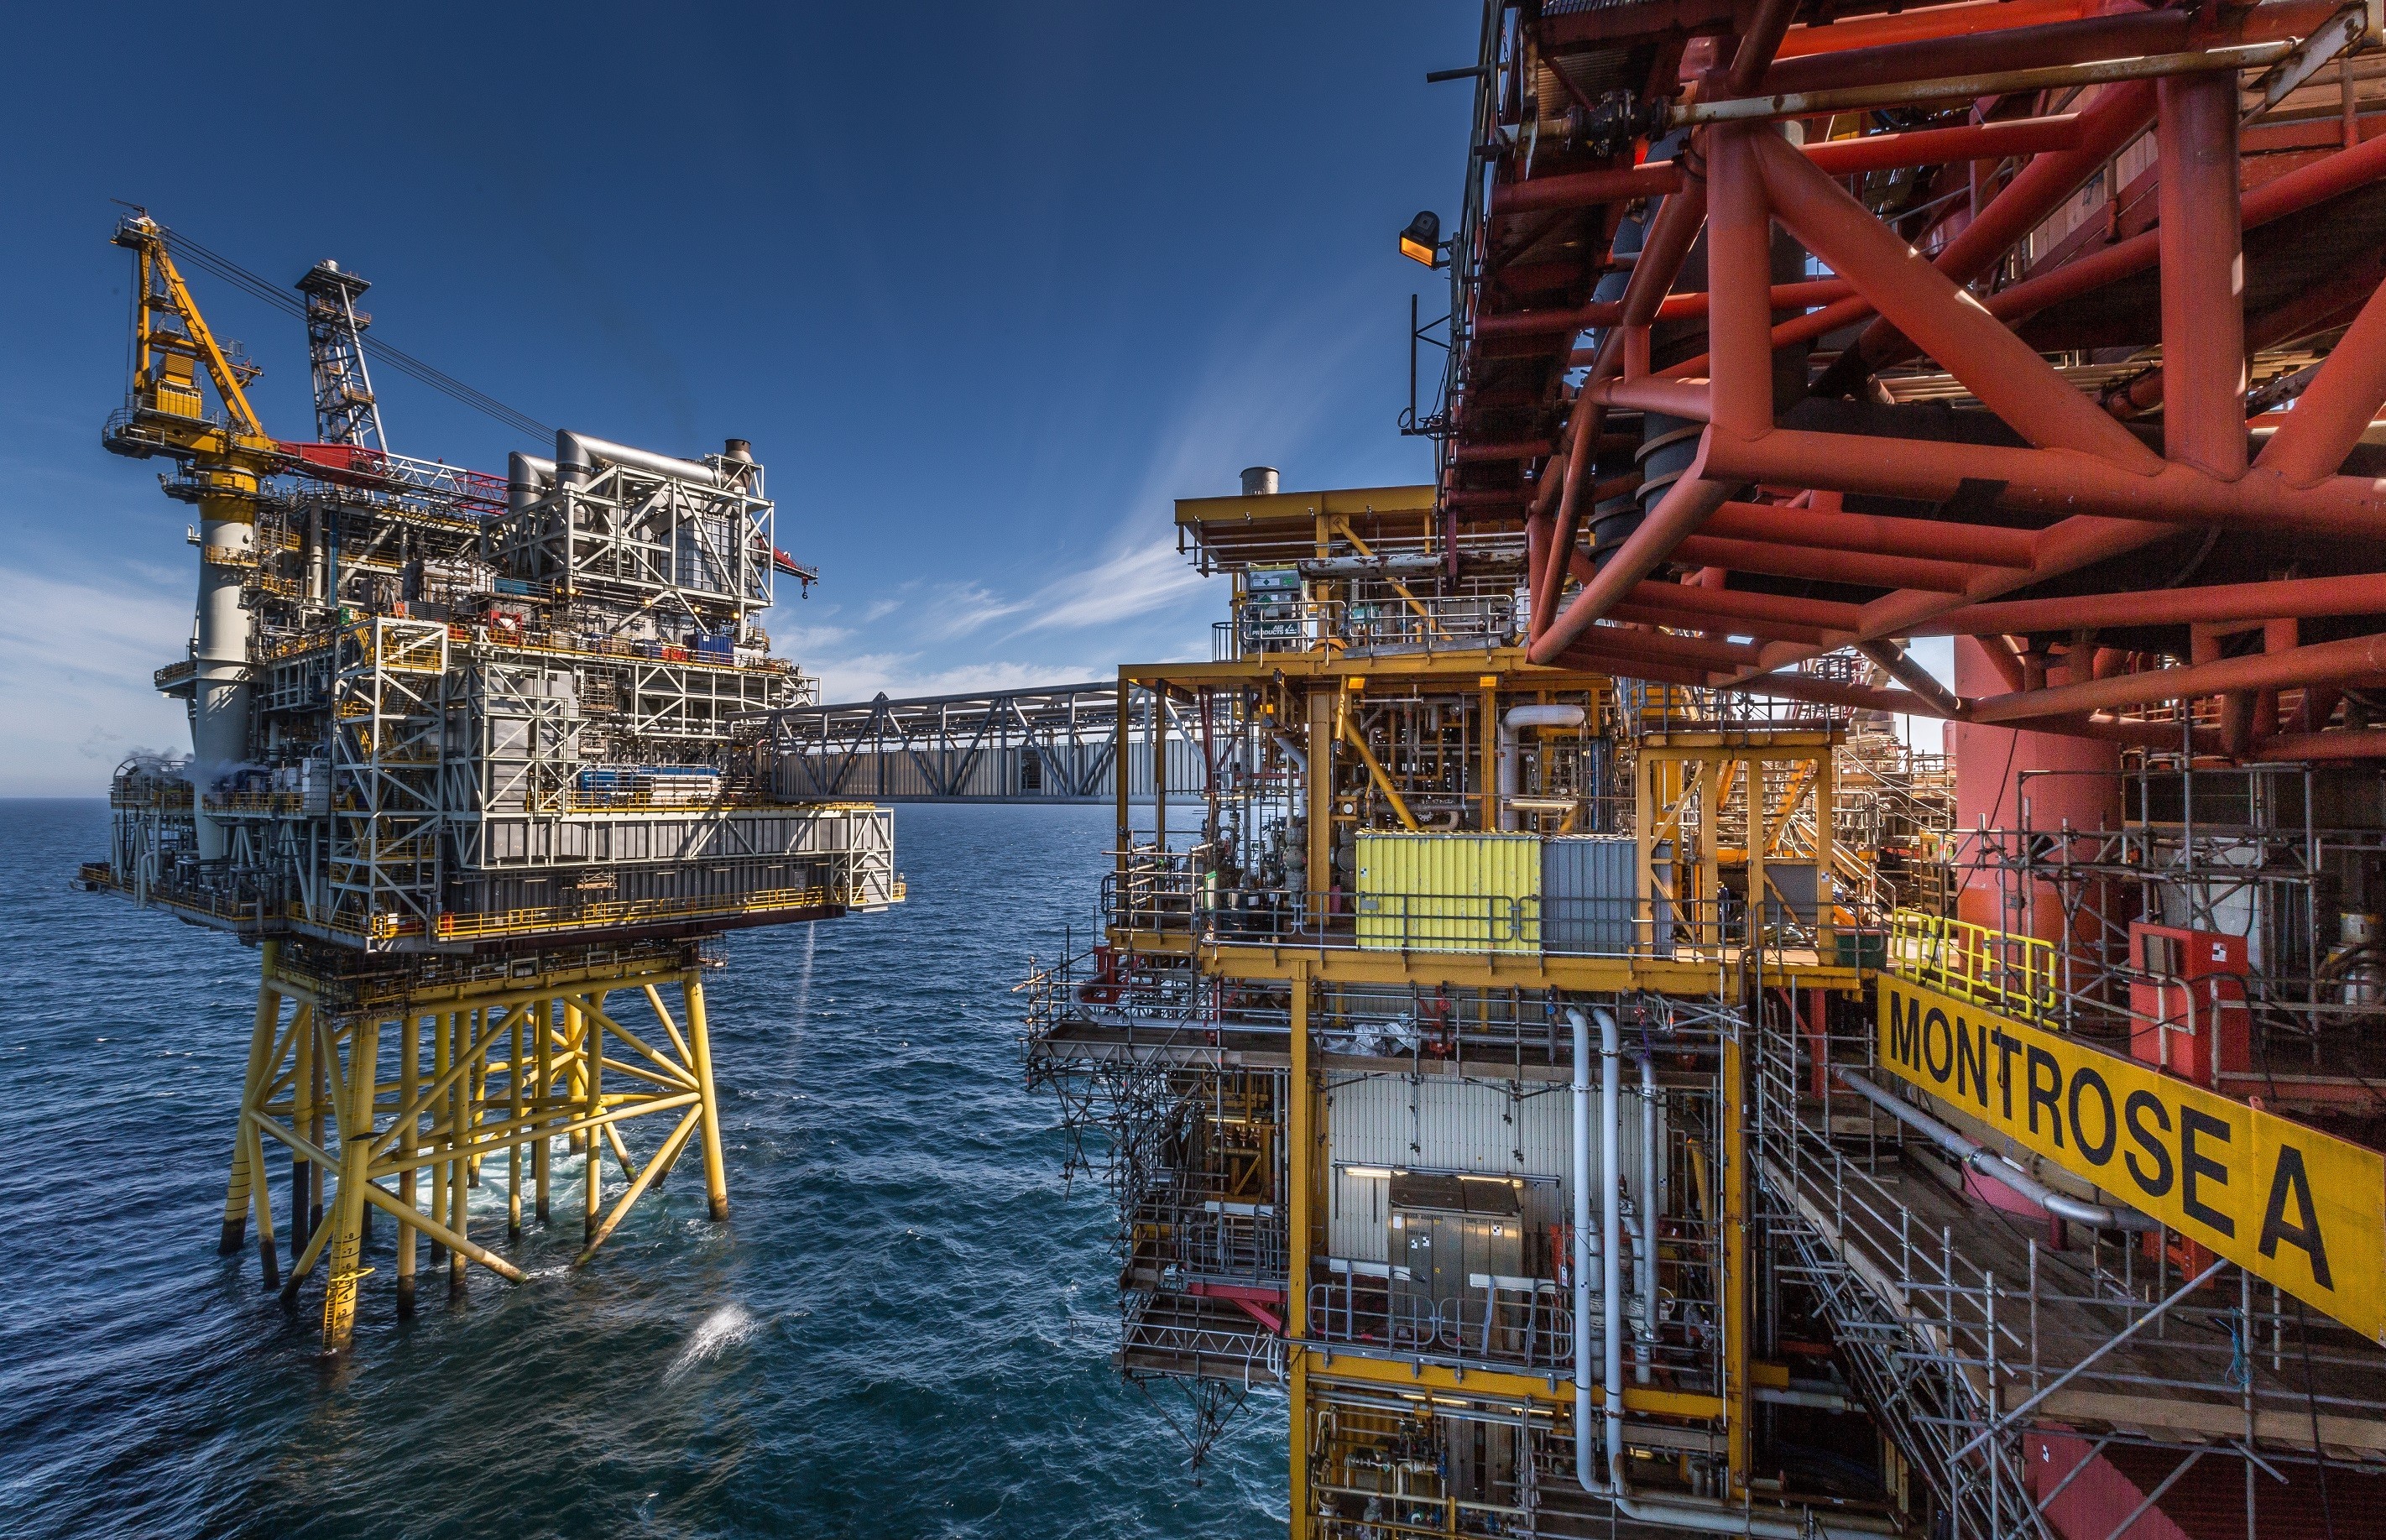 The Repsol Sinopec Resourses UK Montrose Alpha platform with the Montrose BLP located in the North Sea.